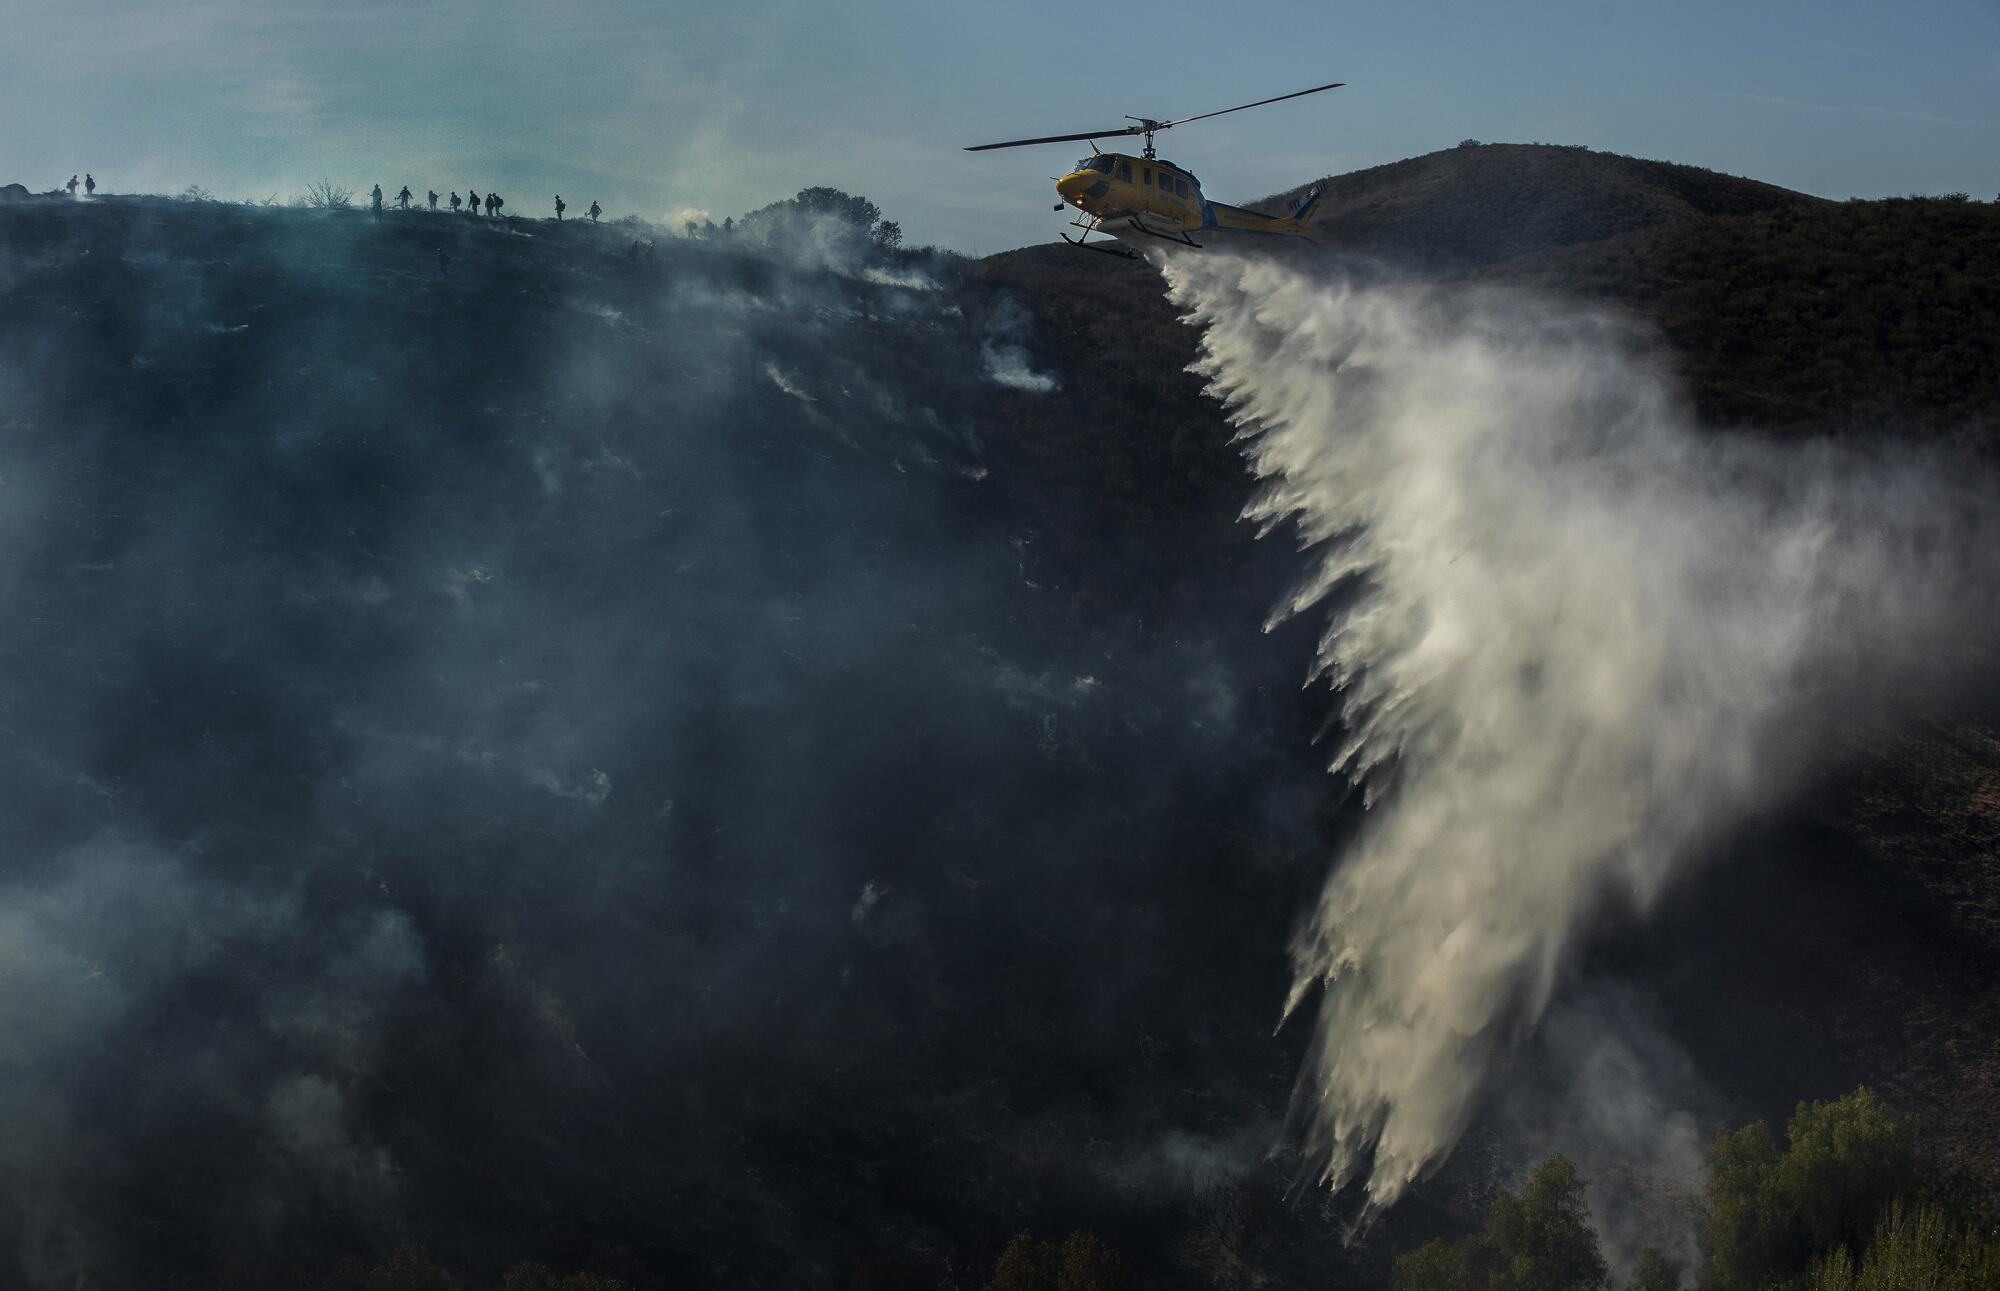 A pilot with the Ventura County Fire Department makes a water drop on the Country fire in Westlake Village.